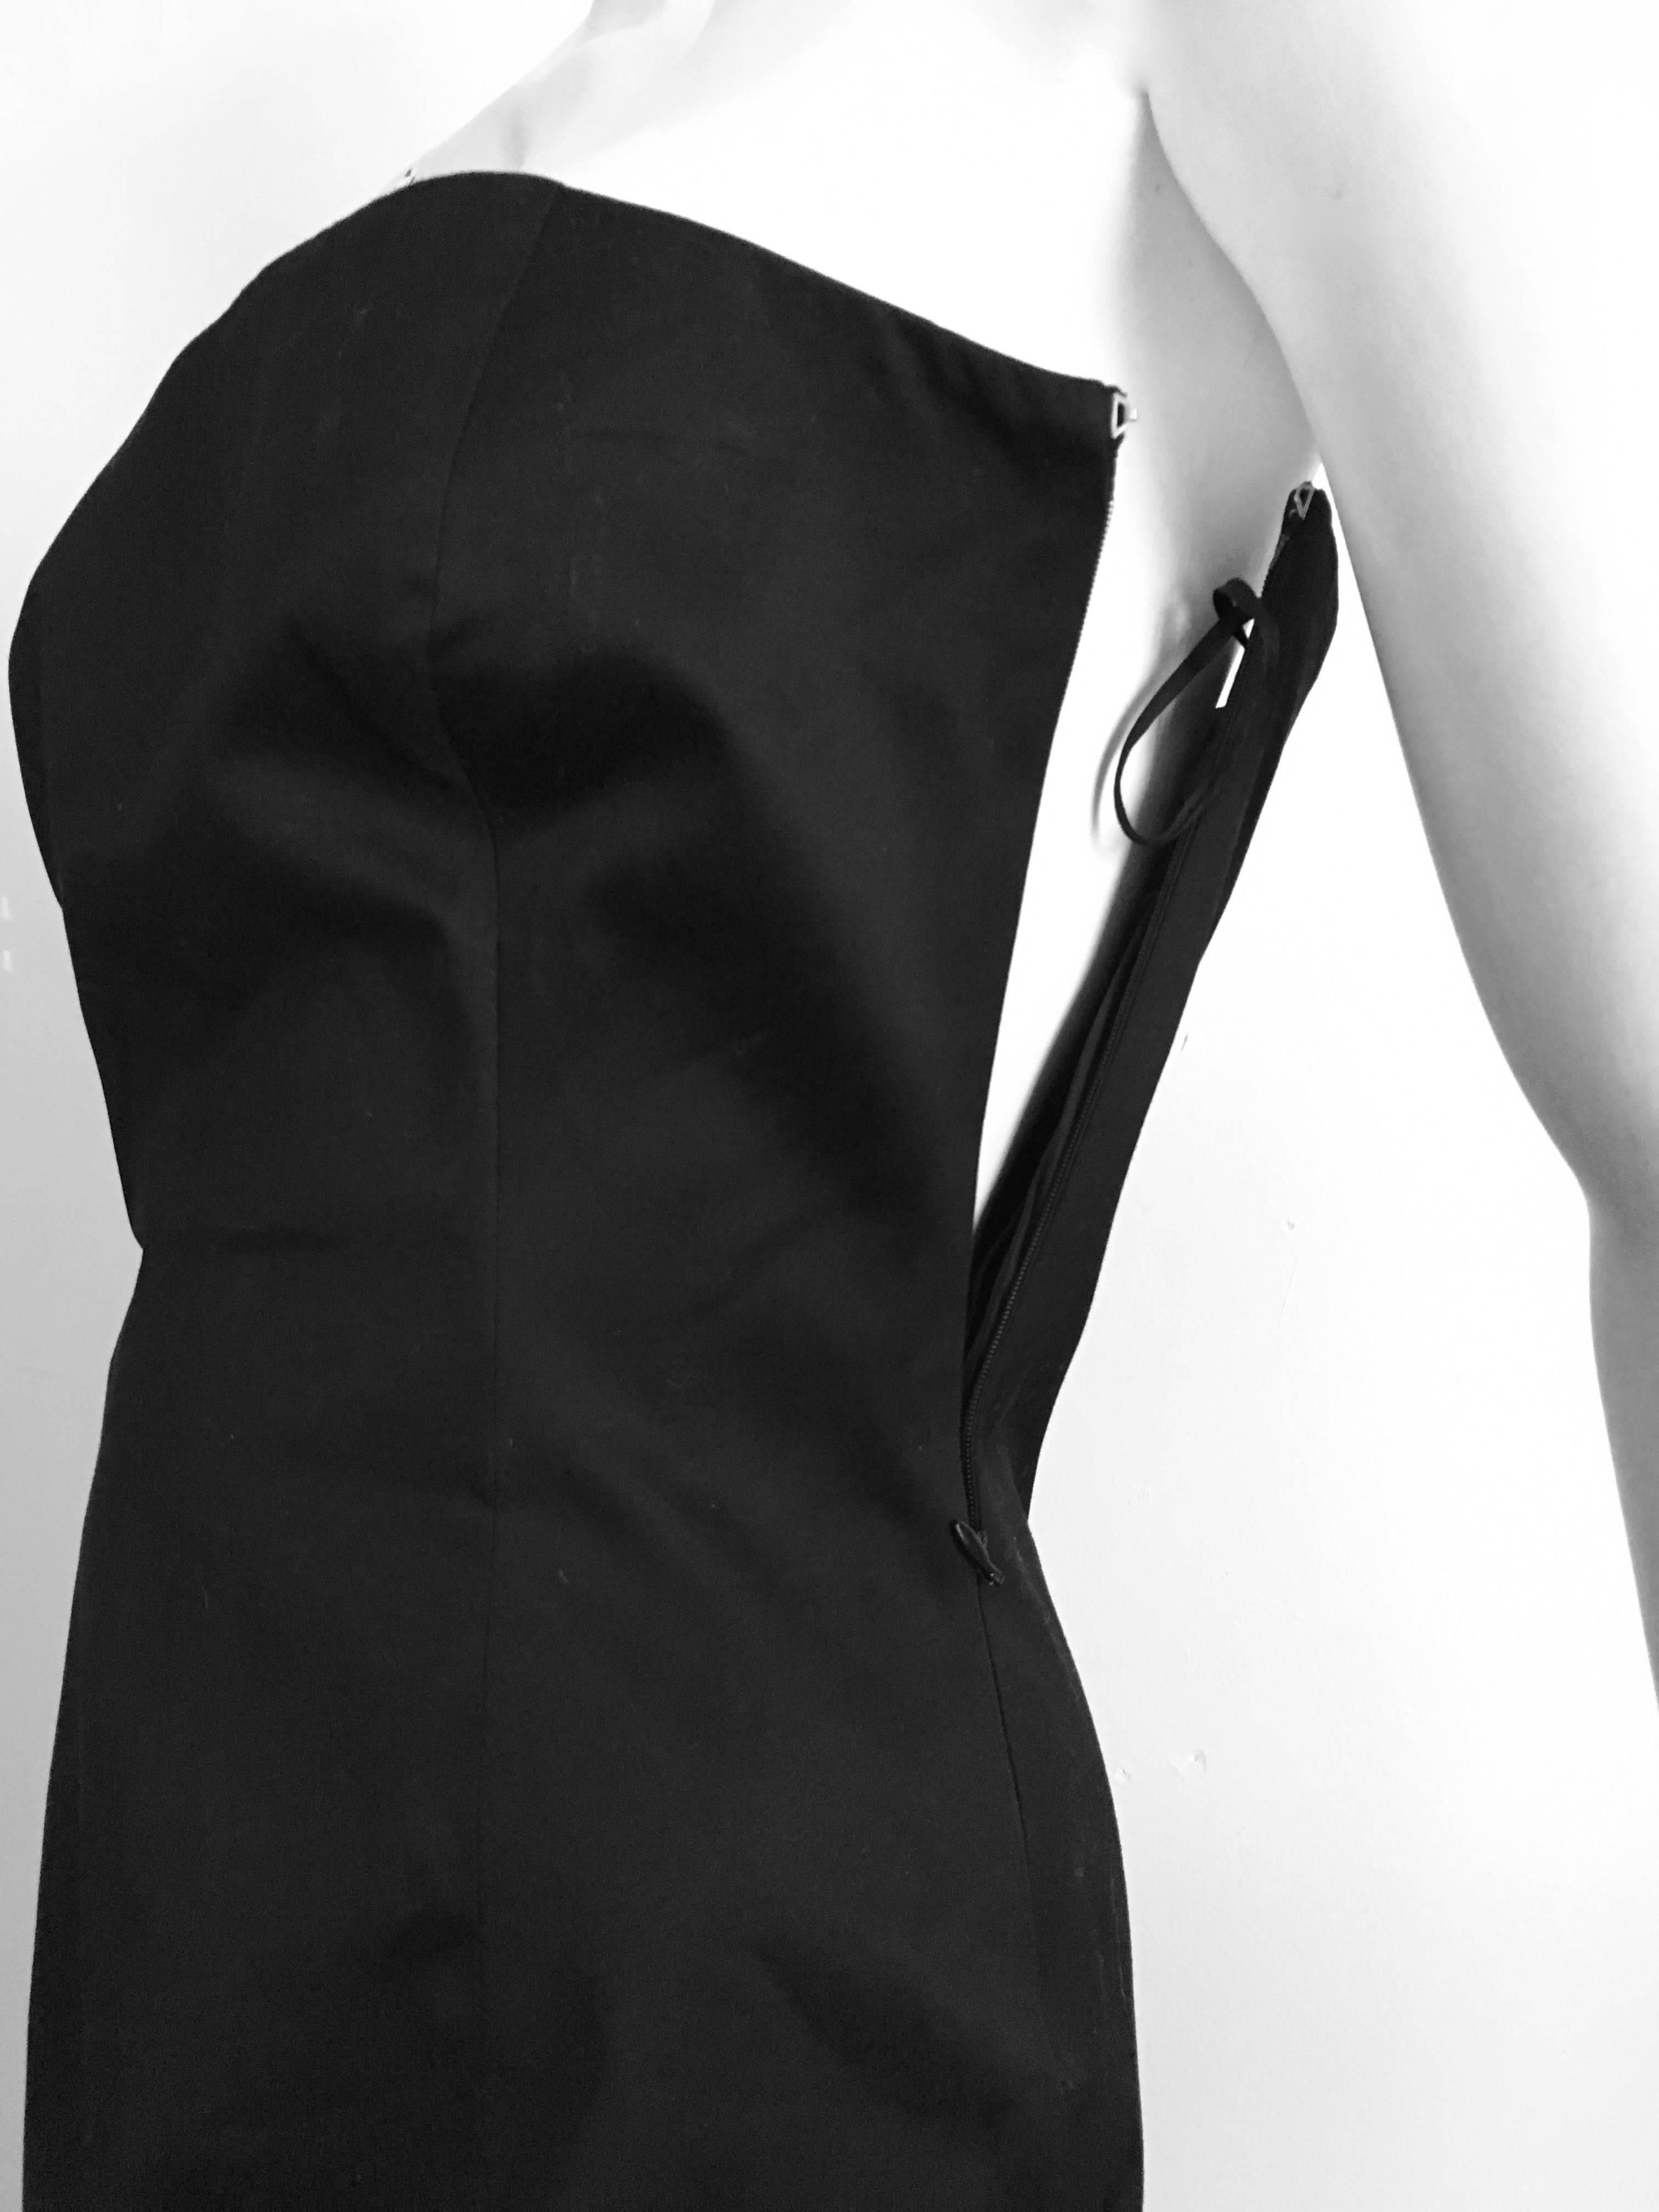 Michael Kors Strapless Cotton Black Cocktail Dress Size 4 / 6. Made in Italy. For Sale 3